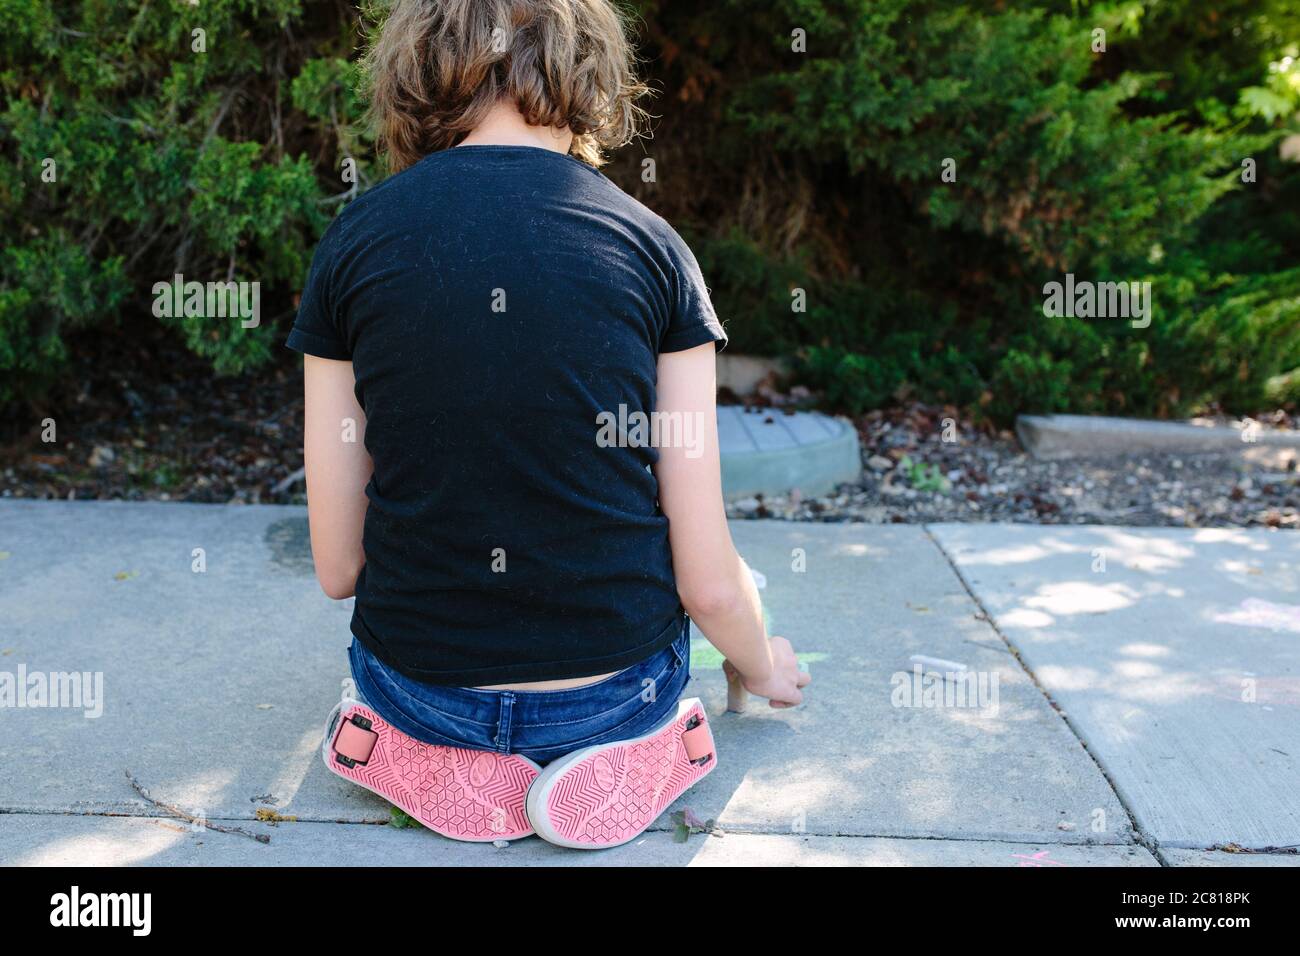 Women sitting wearing low cut trousers with underwear showing from the back  Stock Photo - Alamy